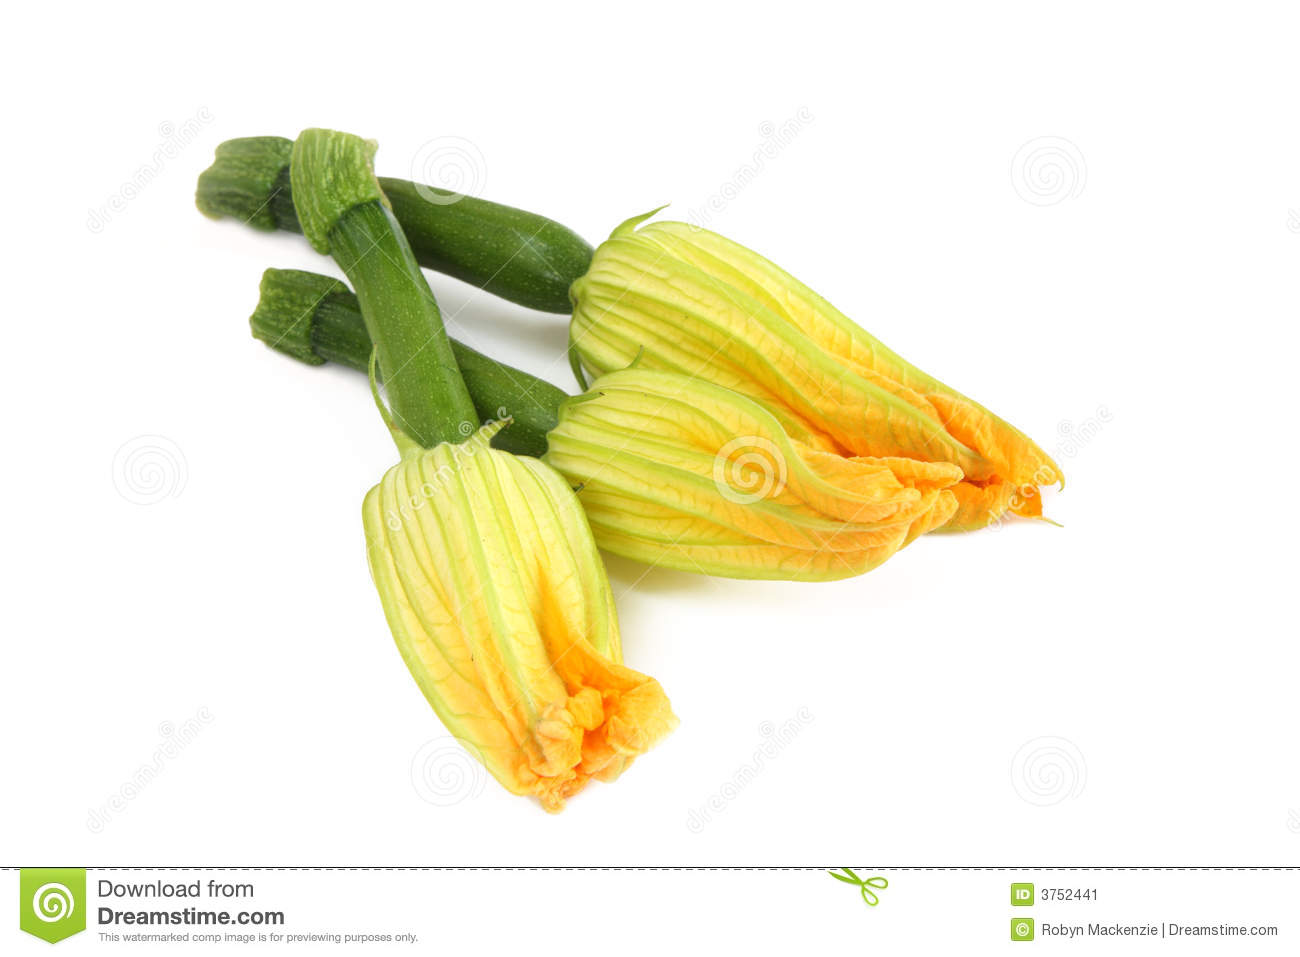 Courgette Or Zucchini Flowers  Edible Flowers With Immature Vegetable